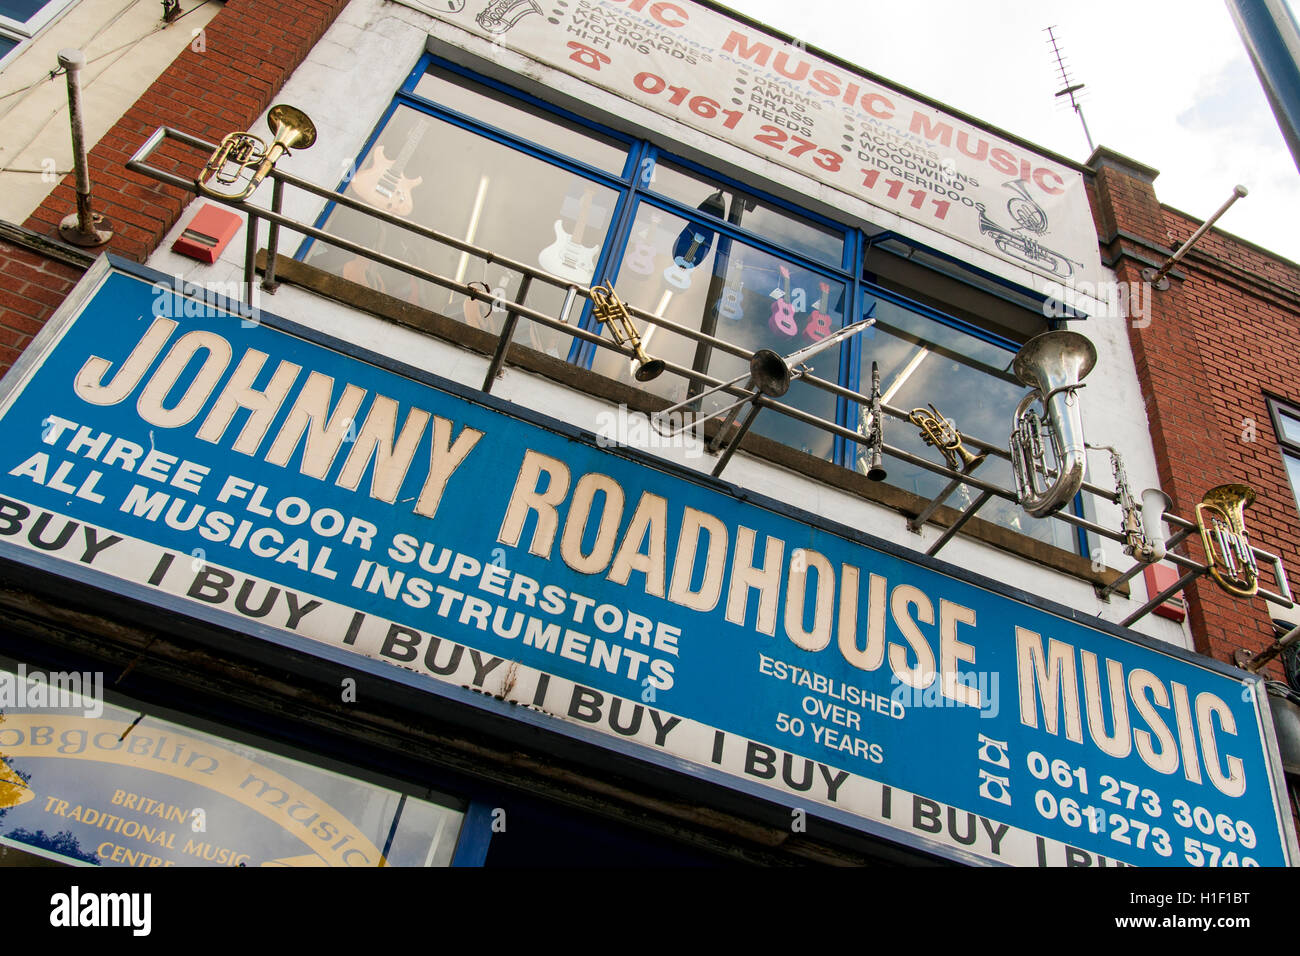 Johnny Roadhouse Music Shop Manchester Stock Photo